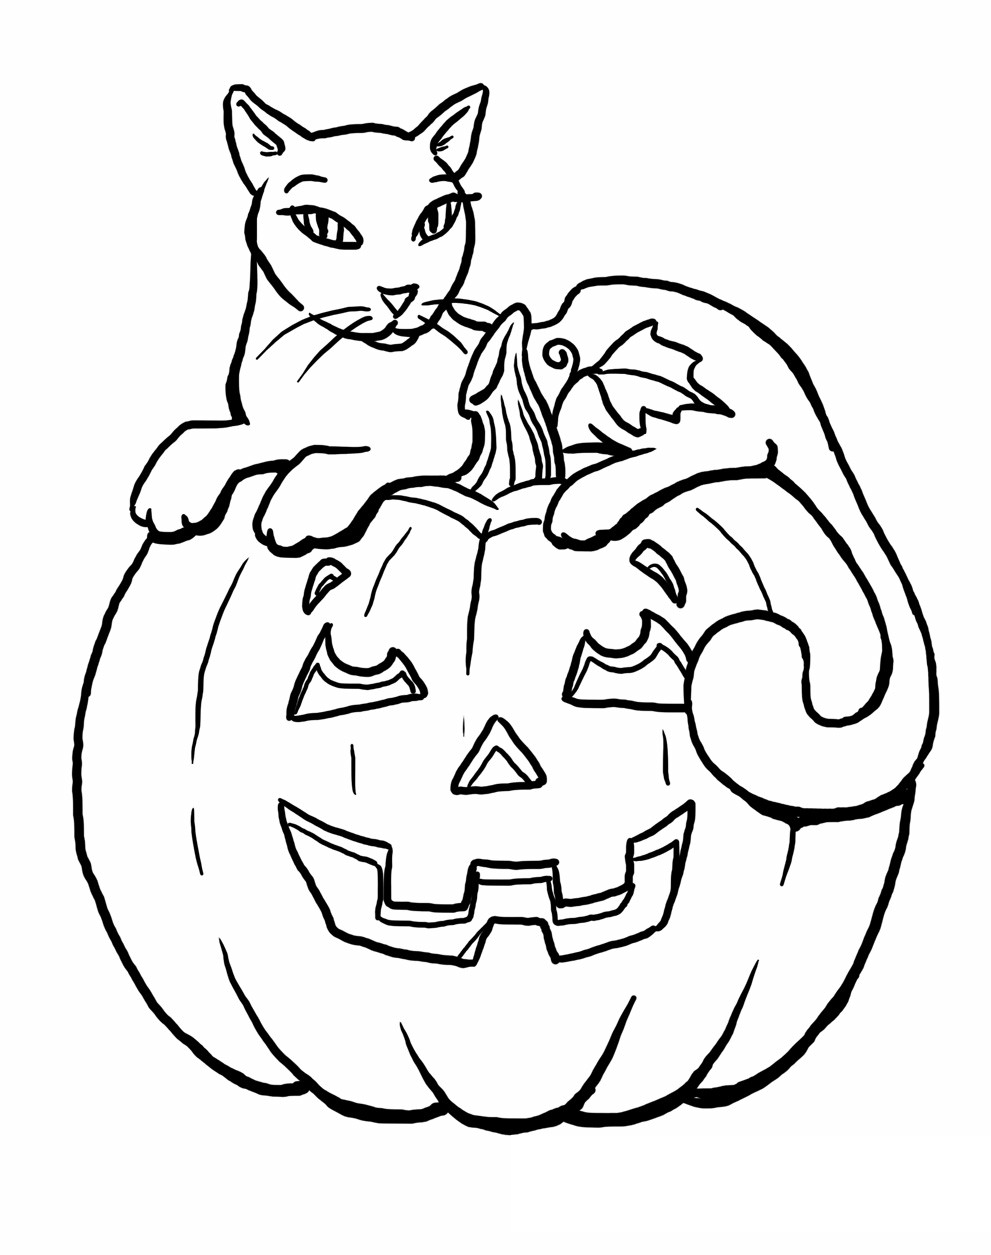 Coloring Pages Of Black Cats at GetDrawings | Free download